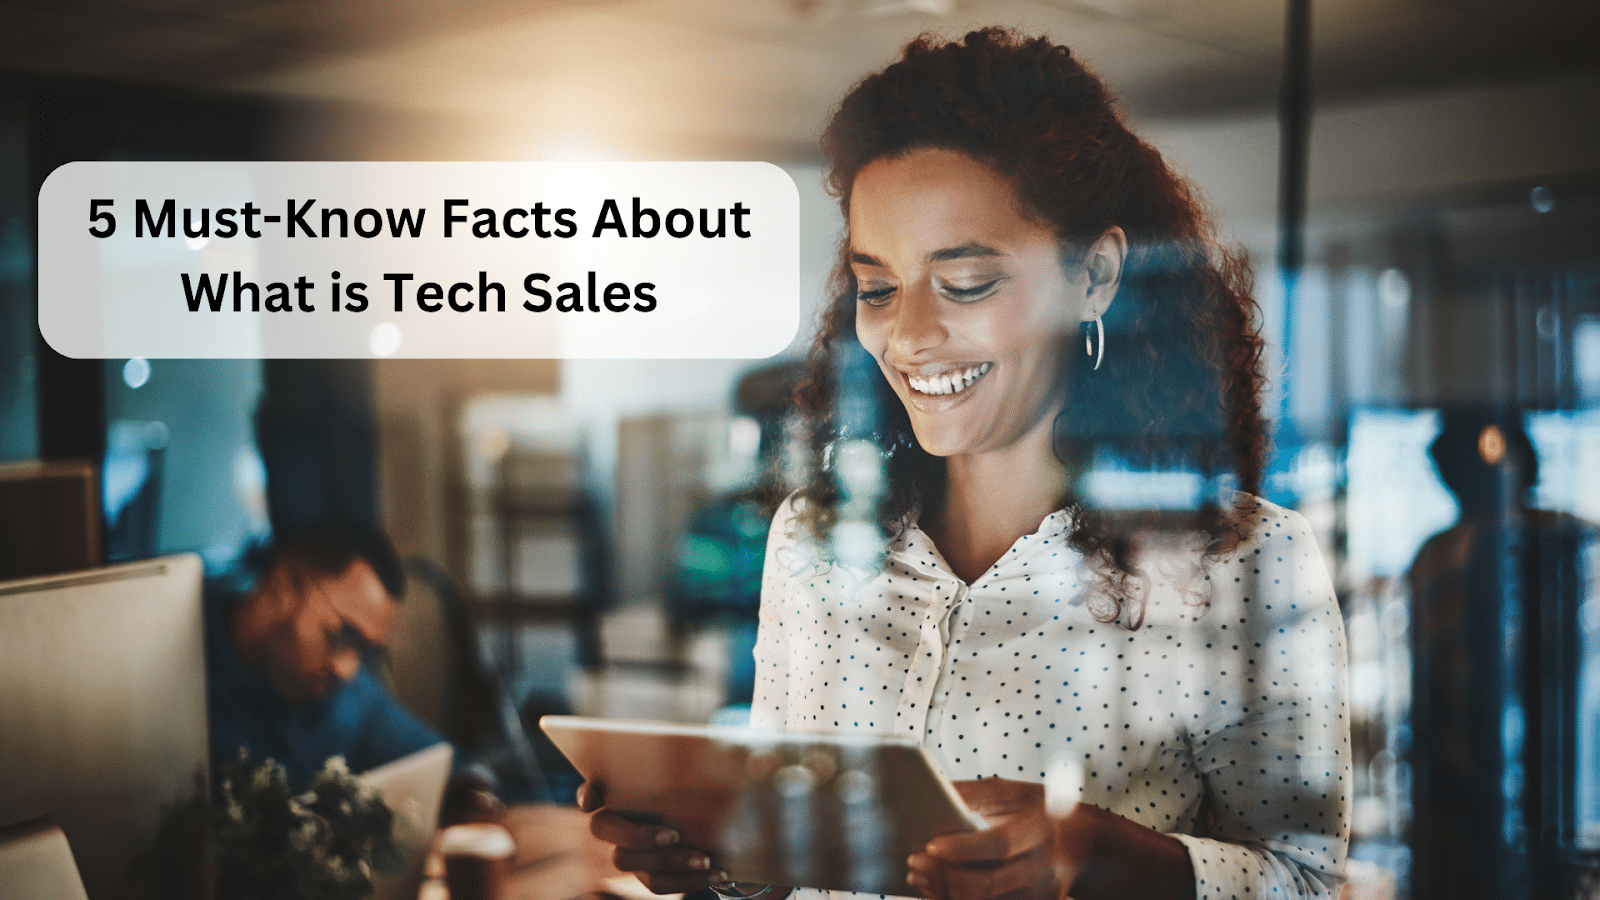 5 Must-Know Facts About What is Tech Sales